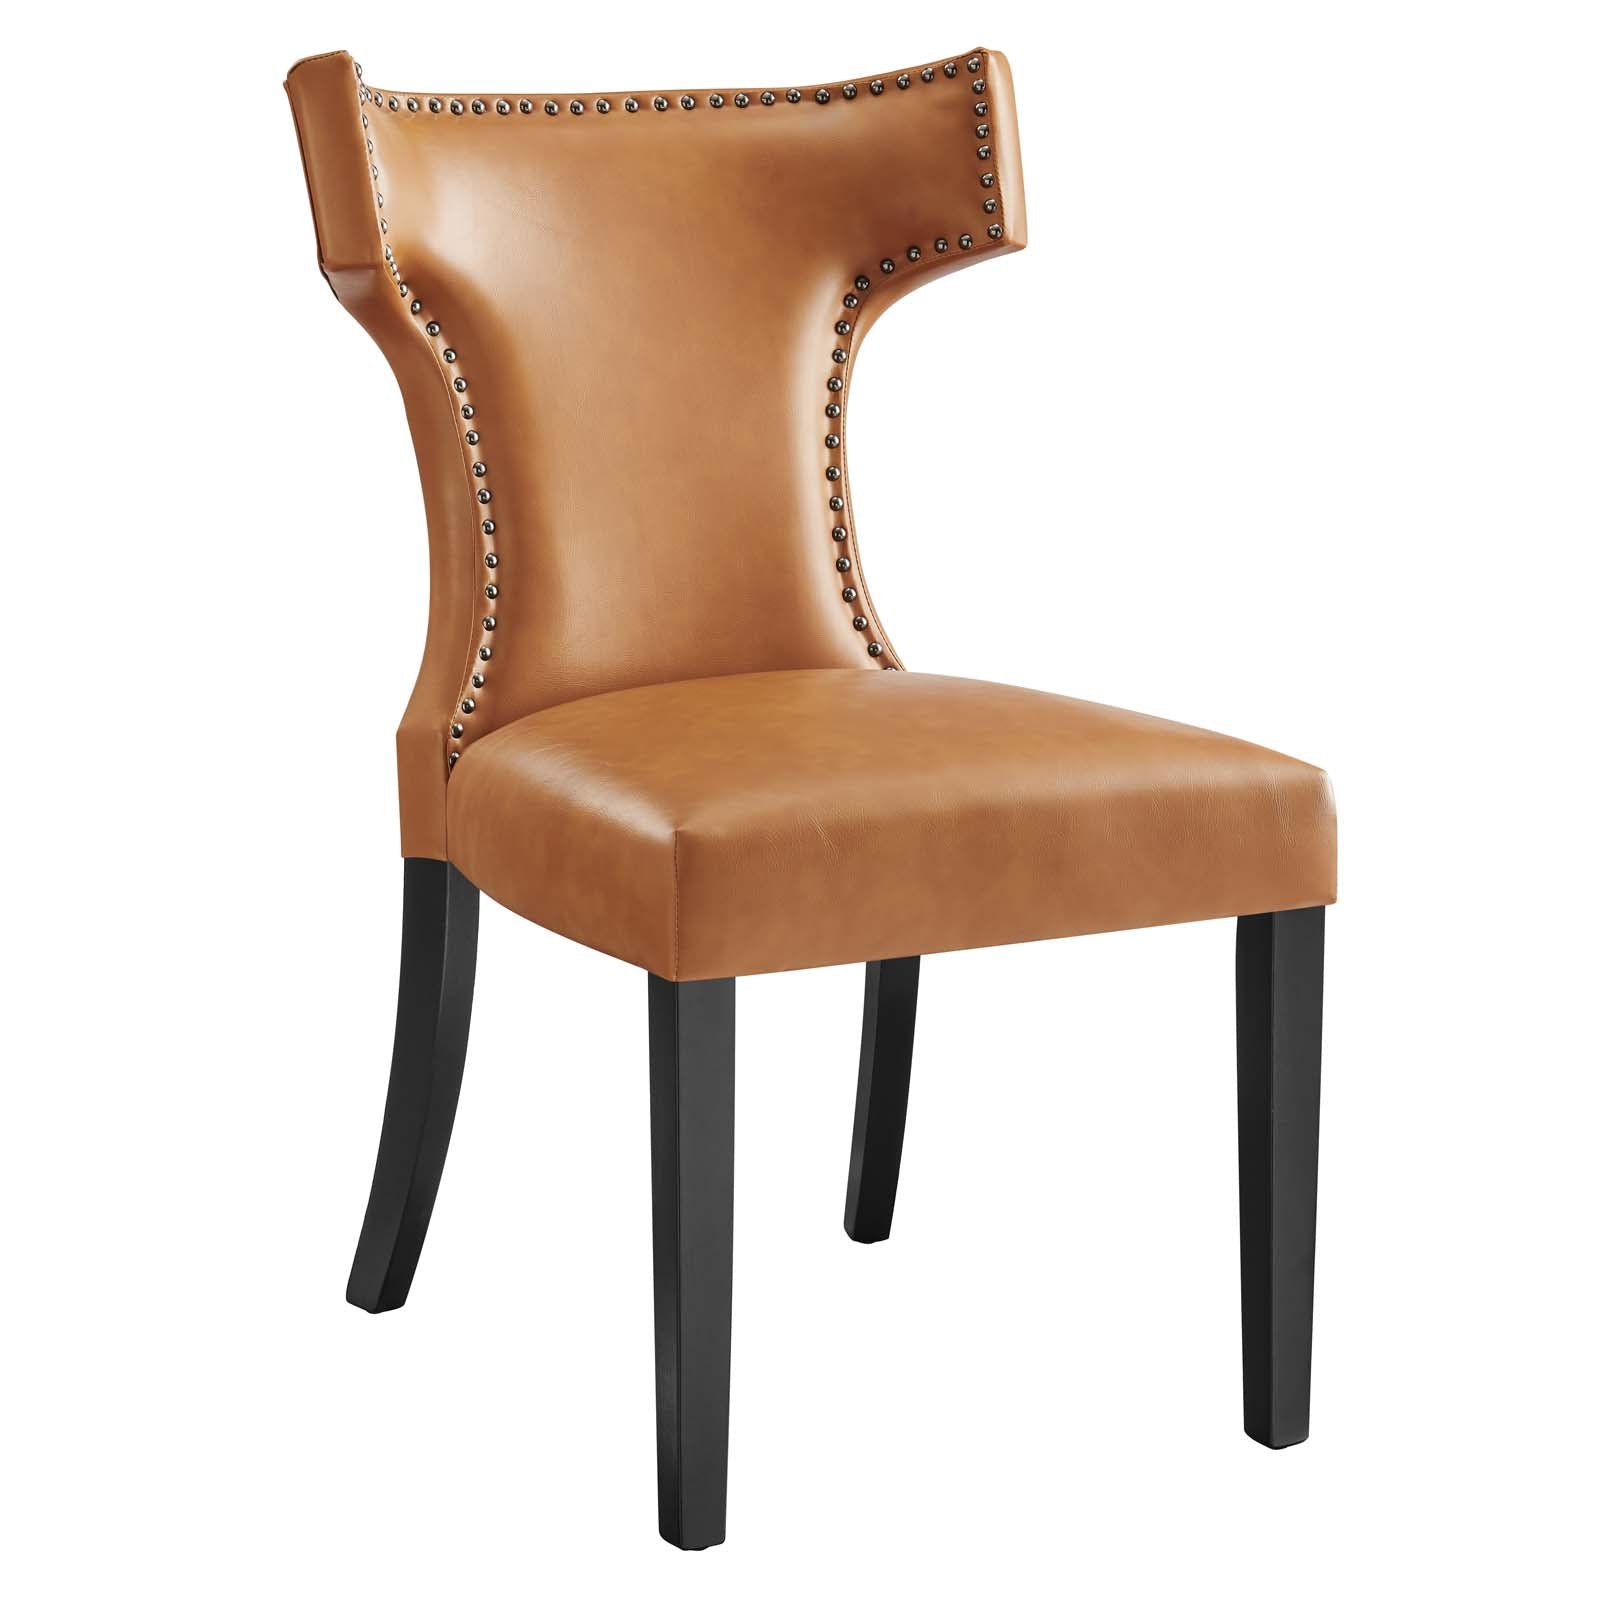 Curve Vegan Leather Dining Chair - East Shore Modern Home Furnishings